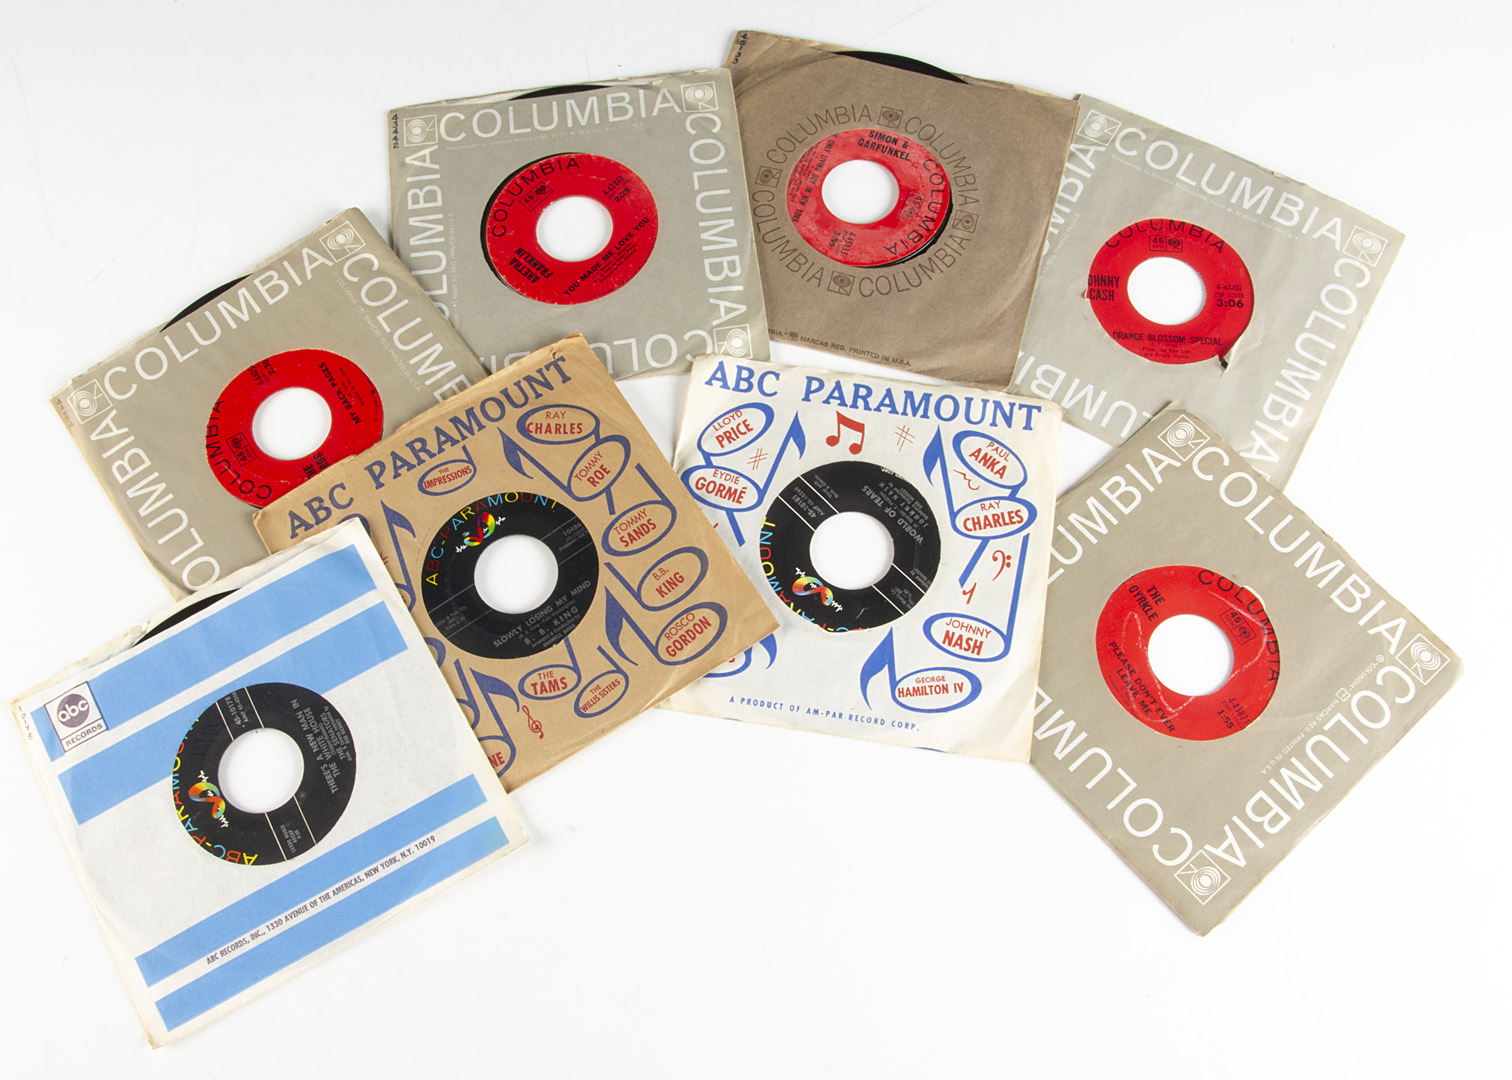 ABC Paramount / Columbia 7" Singles, approximately one hundred and ten singles, comprising mainly